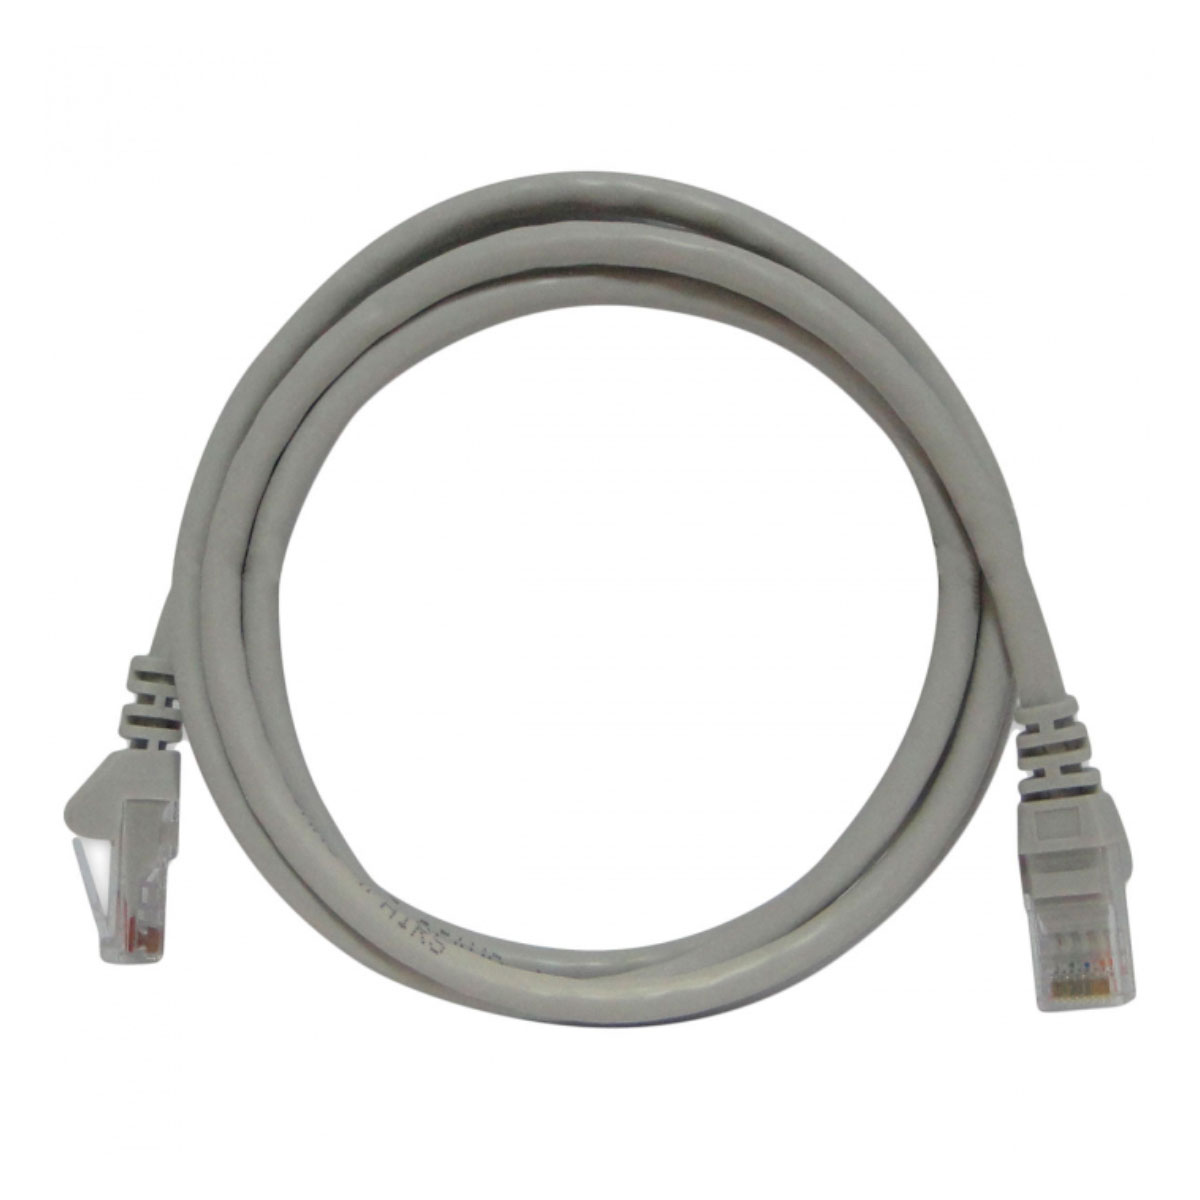 Cabo de Rede UTP (Patch Cord) RJ45 Cat 6 - 1.5 metro - Cinza - CY-PC1.5M-6-26-GY